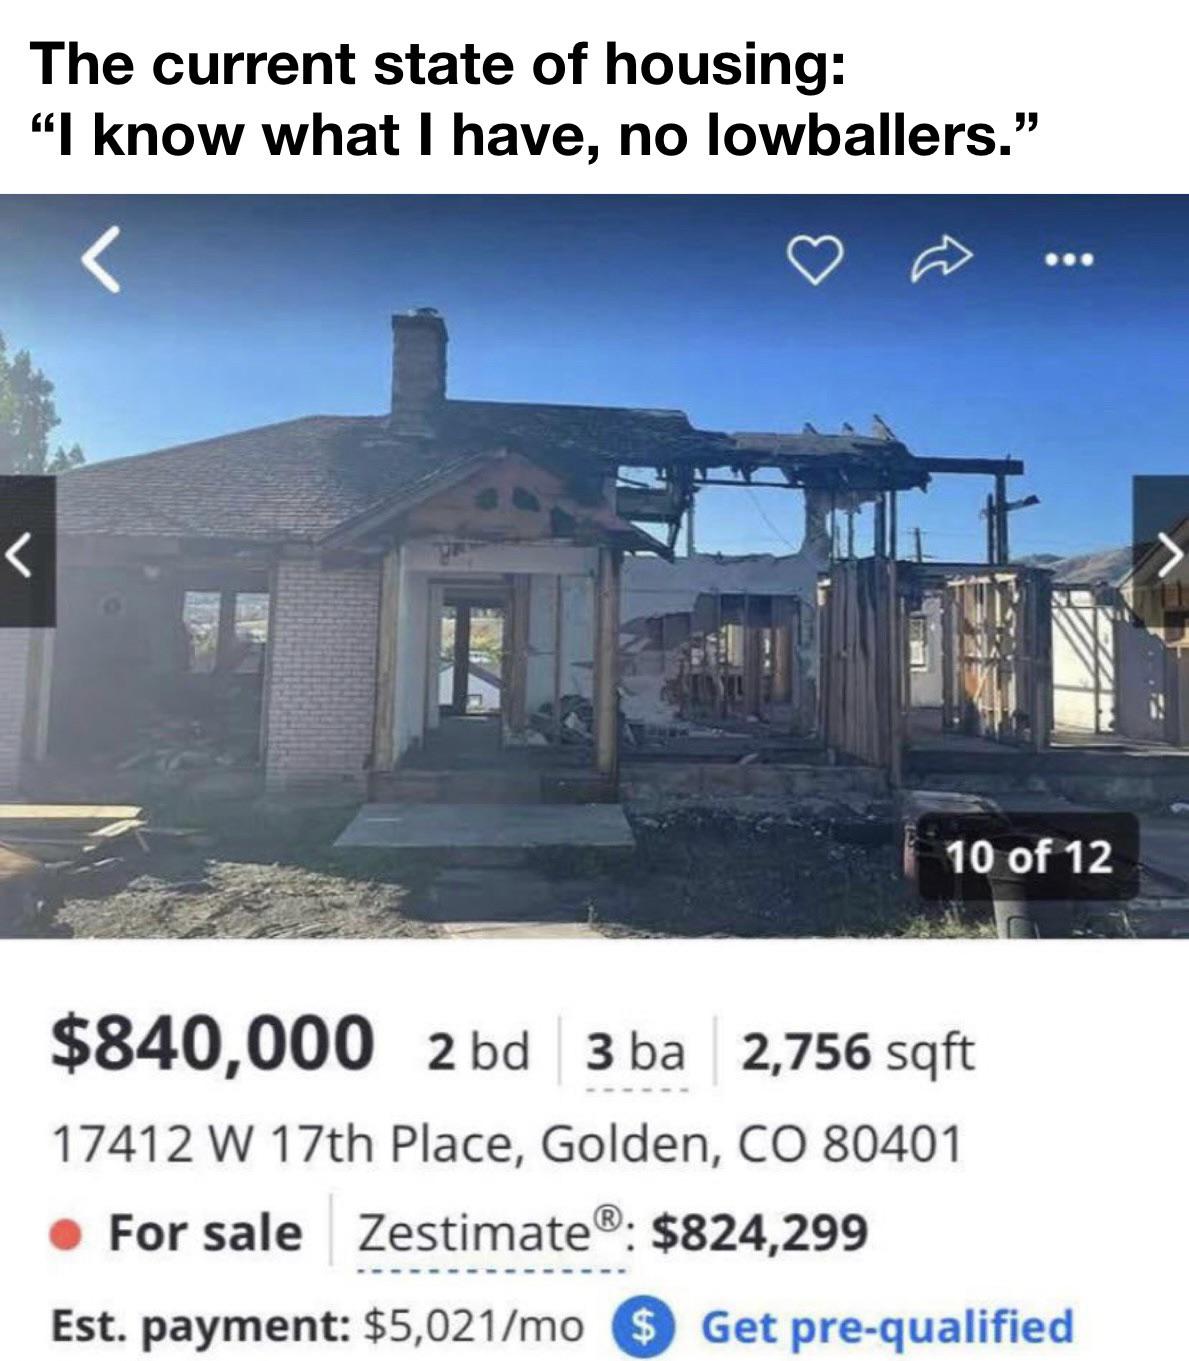 daily dose of randoms - real estate - The current state of housing "I know what I have, no lowballers."